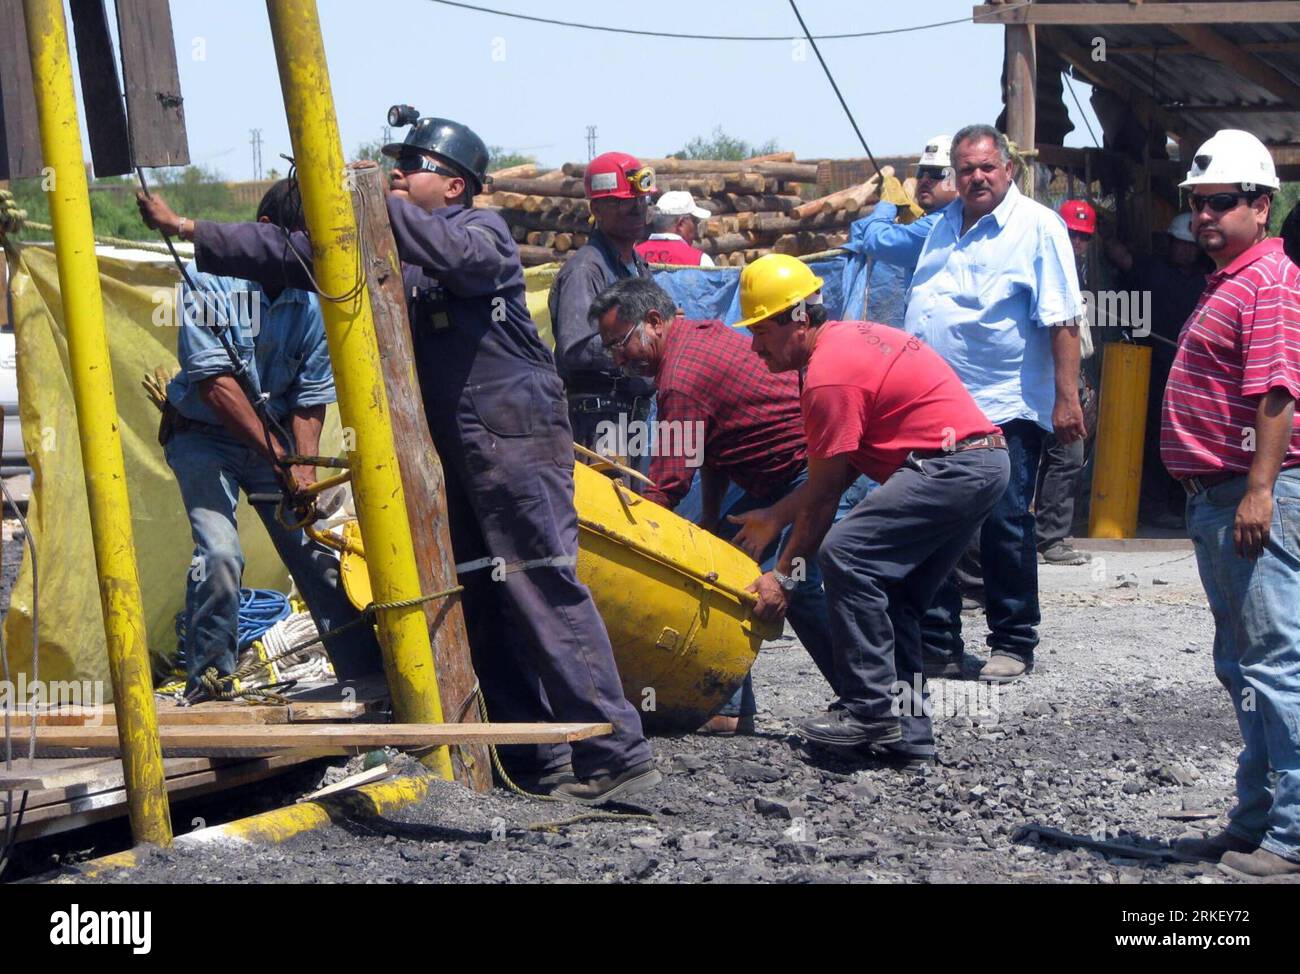 Bildnummer: 55314768  Datum: 04.05.2011  Copyright: imago/Xinhua (110504) -- SAN JUAN DE SABINAS, May 4, 2011 (Xinhua) -- Rescue workers prepare to enter a coal mine in the town of San Juan de las Sabinas, Coahuila, northwest Mexico, May 3, 2011. At least 13 Mexican miners were trapped on Tuesday after an explosion in the coal mine caused partial collapse of the structure. (Xinhua/Zocalo Monclova) (MANDATORY CREDIT/NO ARCHIVE/NO SALES/EDITORIAL USE ONLY) MEXICO-SAN JUAN DE SABINAS-MINERS-ACCIDENT PUBLICATIONxNOTxINxCHN Gesellschaft Wirtschaft Mine Unglück Minenunglück kbdig xsk 2011 quer     B Stock Photo